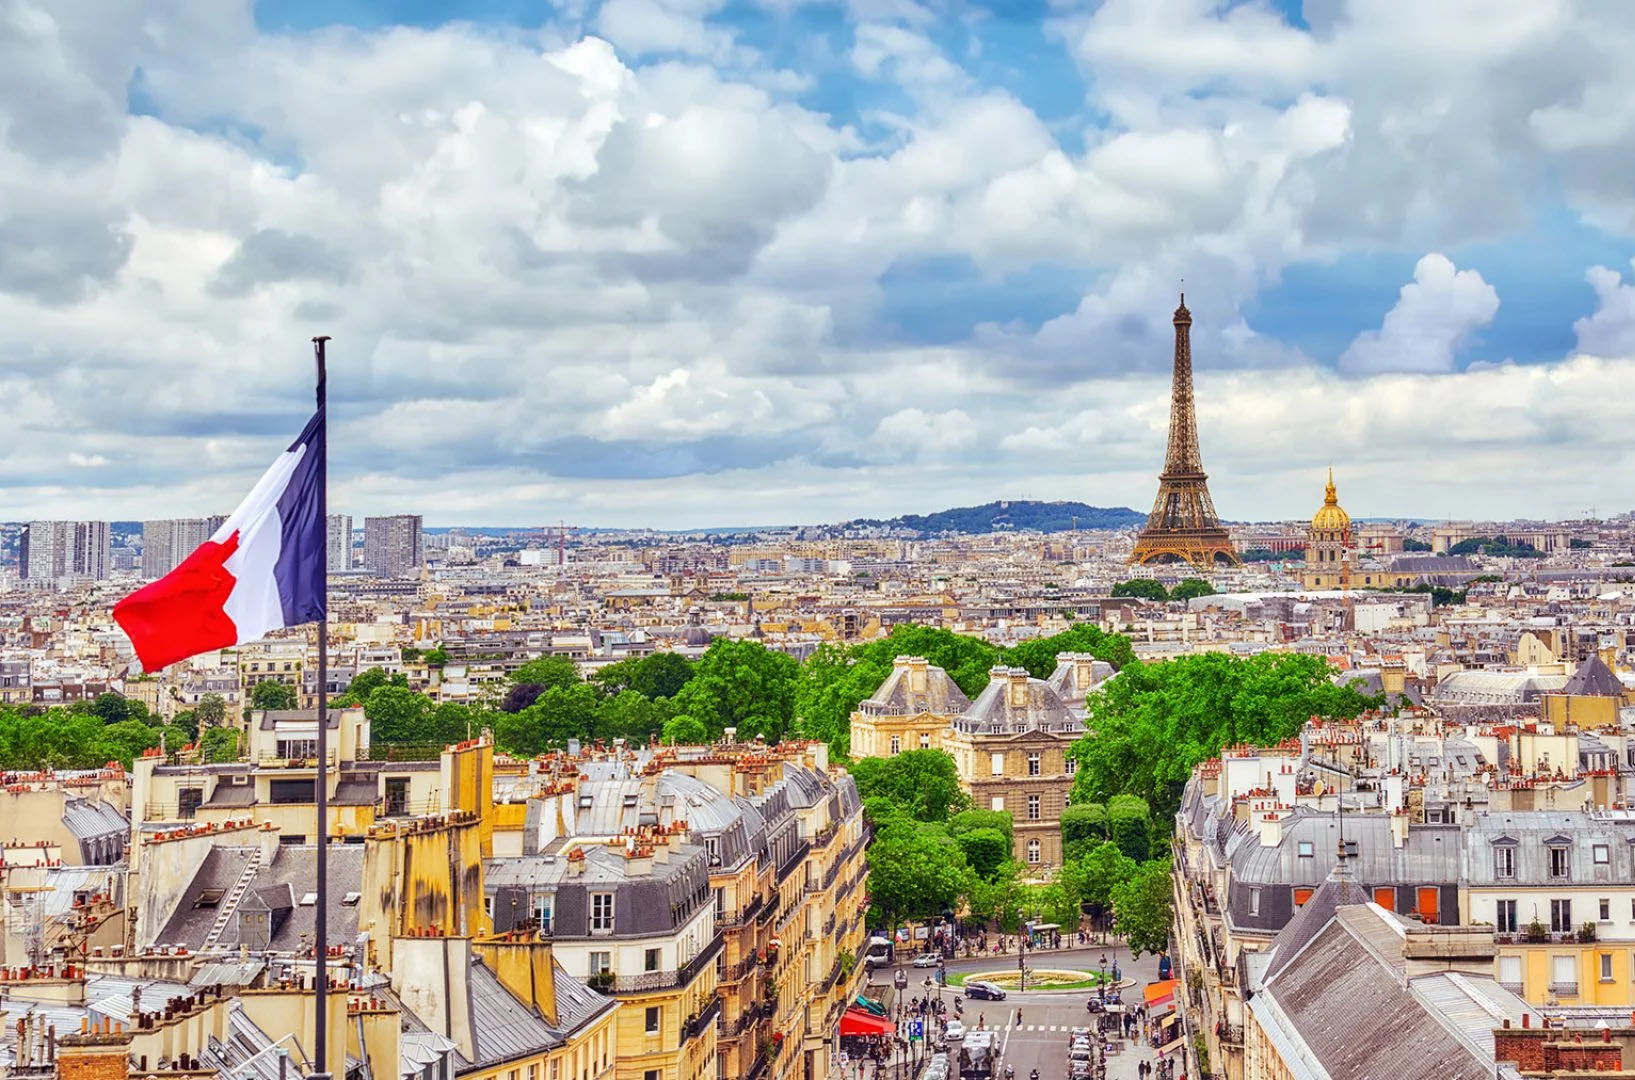 10 interesting facts about France